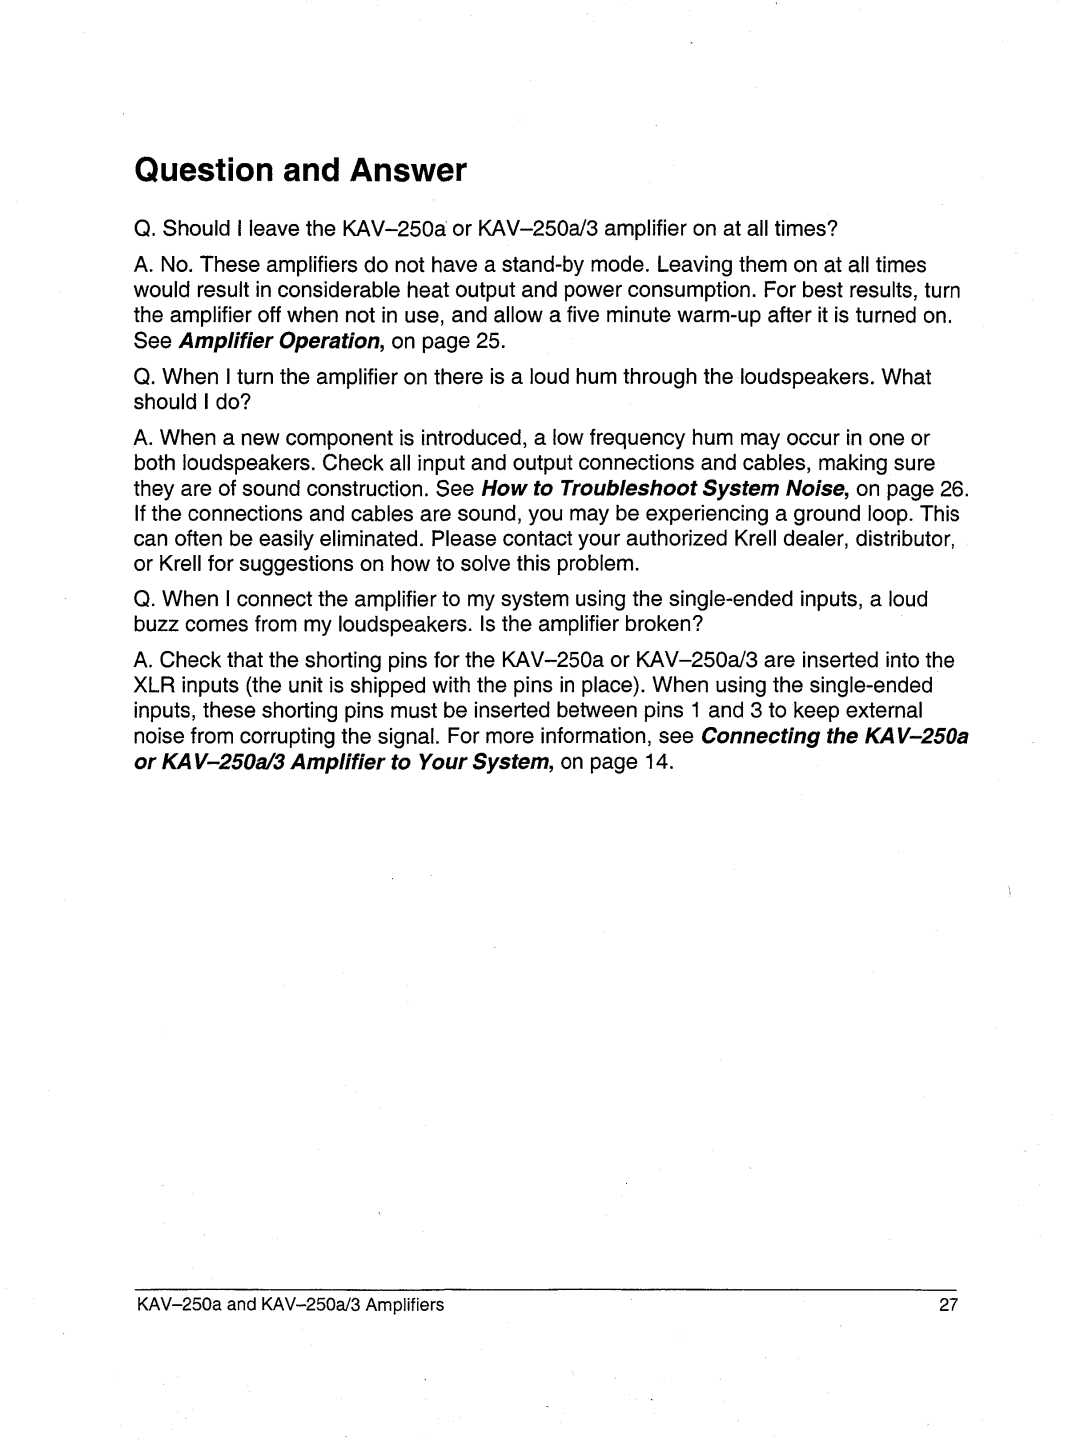 Krell Industries manual Question and Answer, KAV-250aand KAV-250a/3Amplifiers 